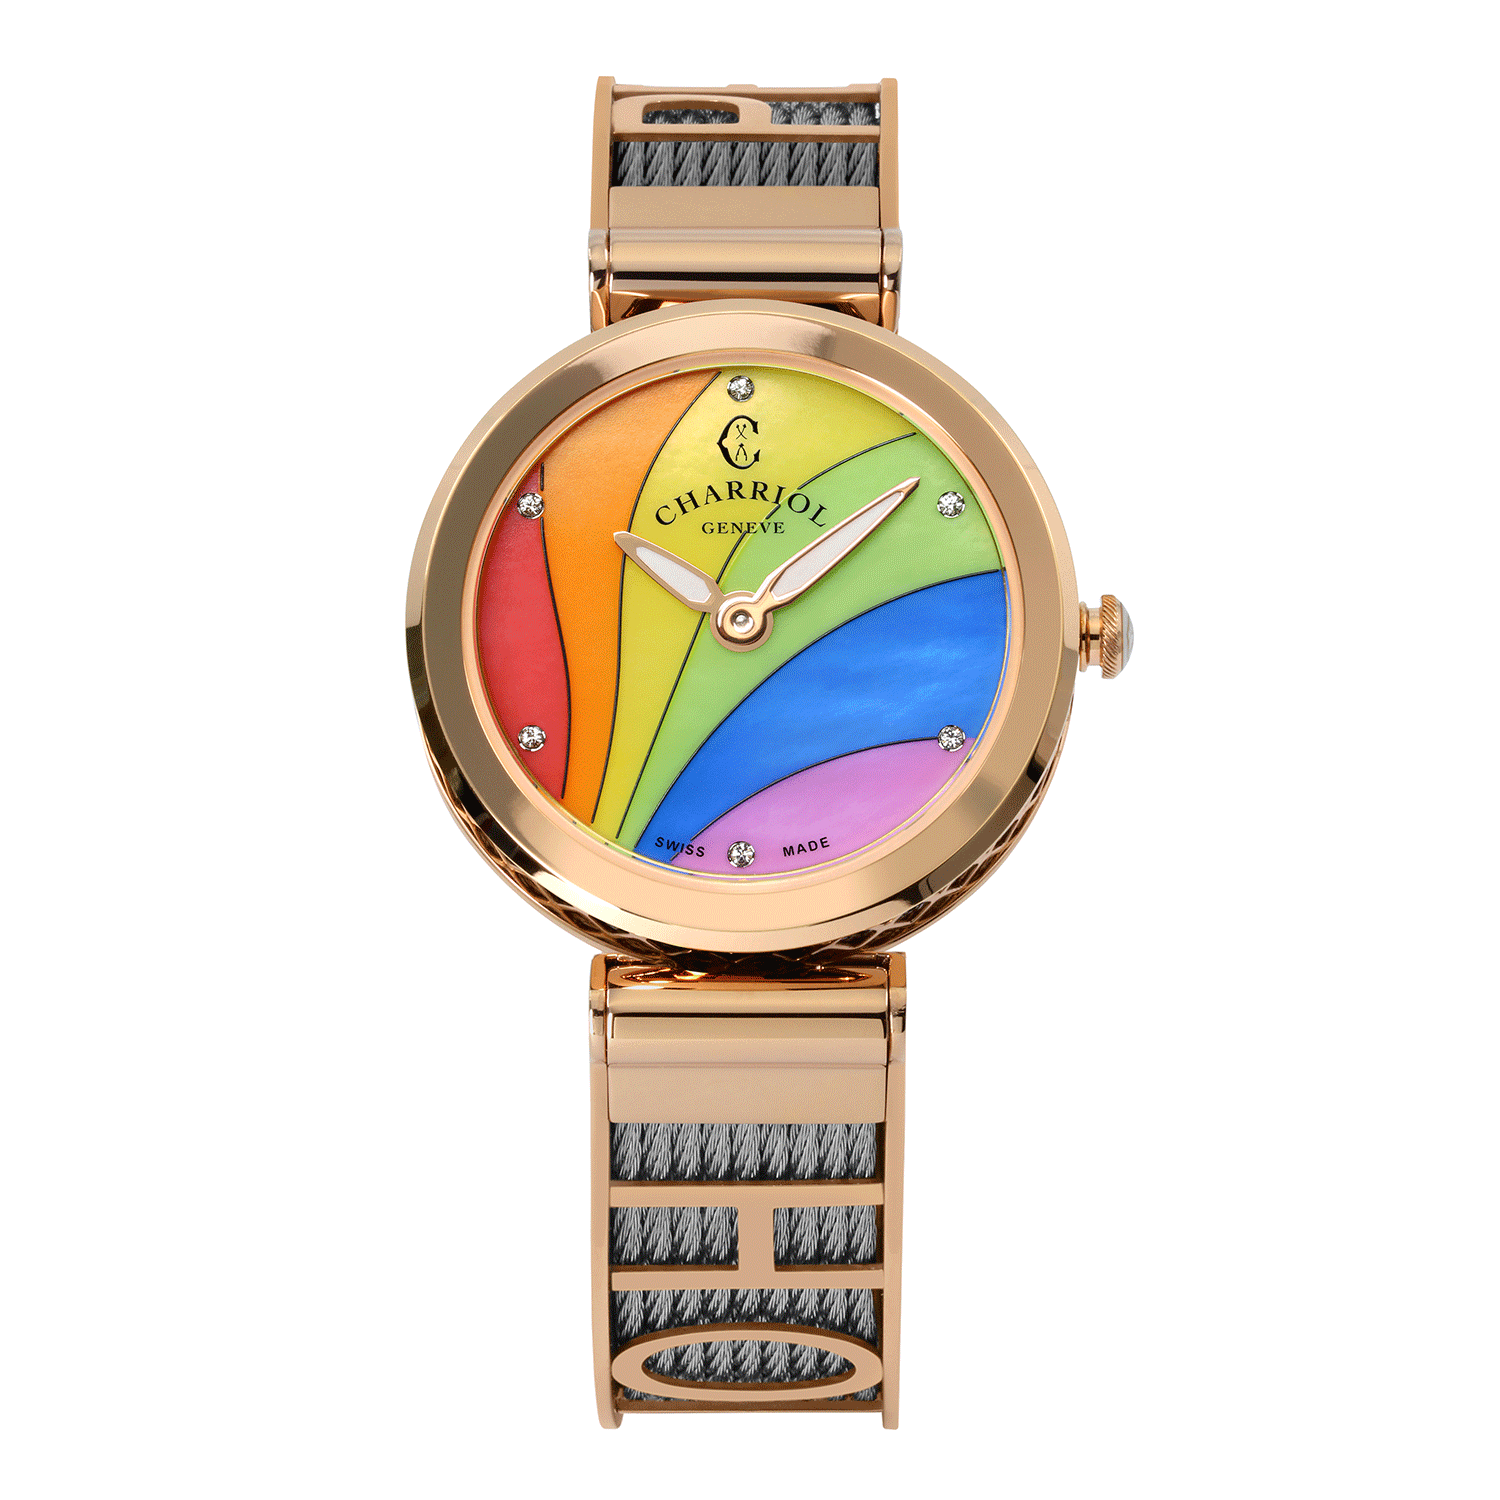 FOREVER YOURS, 32MM, QUARTZ CALIBRE. RAINBOW WITH 6 ZIRCONIAS DIAL, STEEL ROSE GOLD PVD BEZEL, STEEL CABLE BRACELET - Charriol Geneve -  Watch